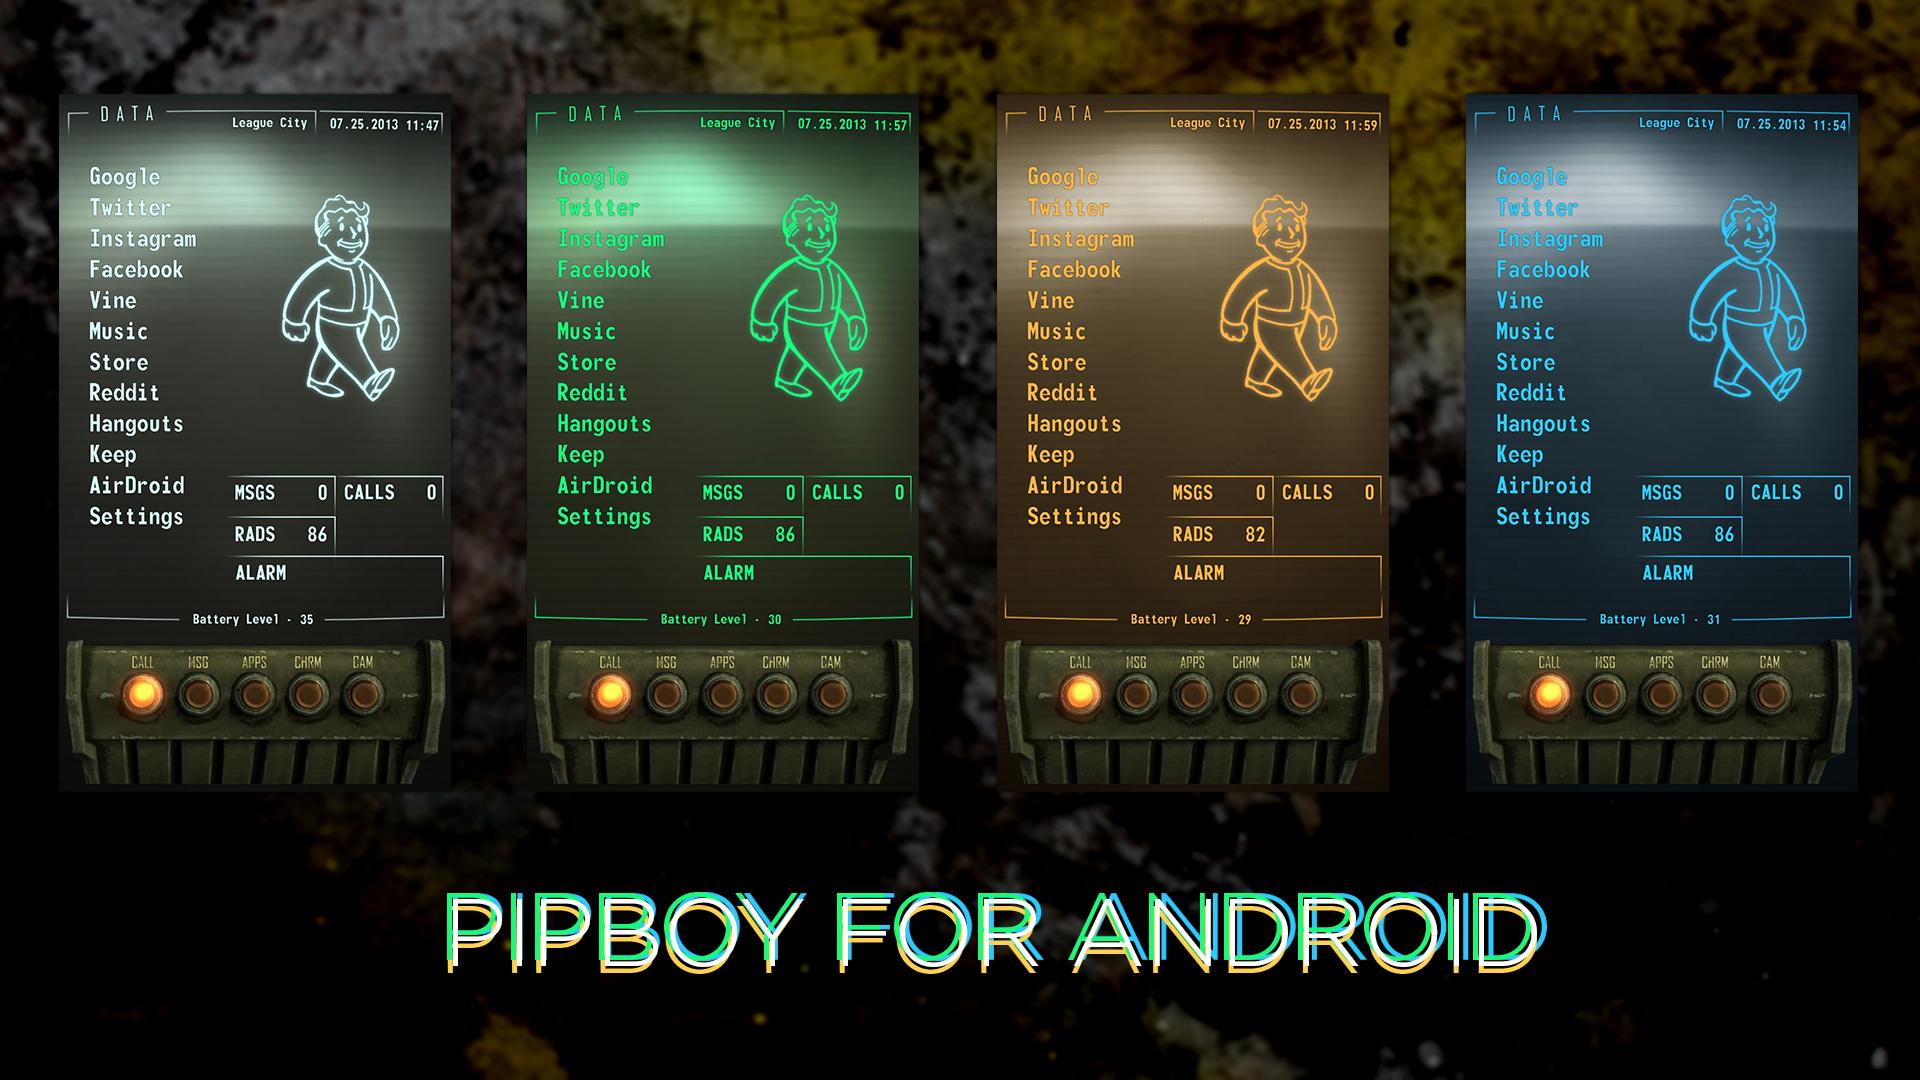 Give You My Improved Fallout Pipboy Android Theme Xpost From R